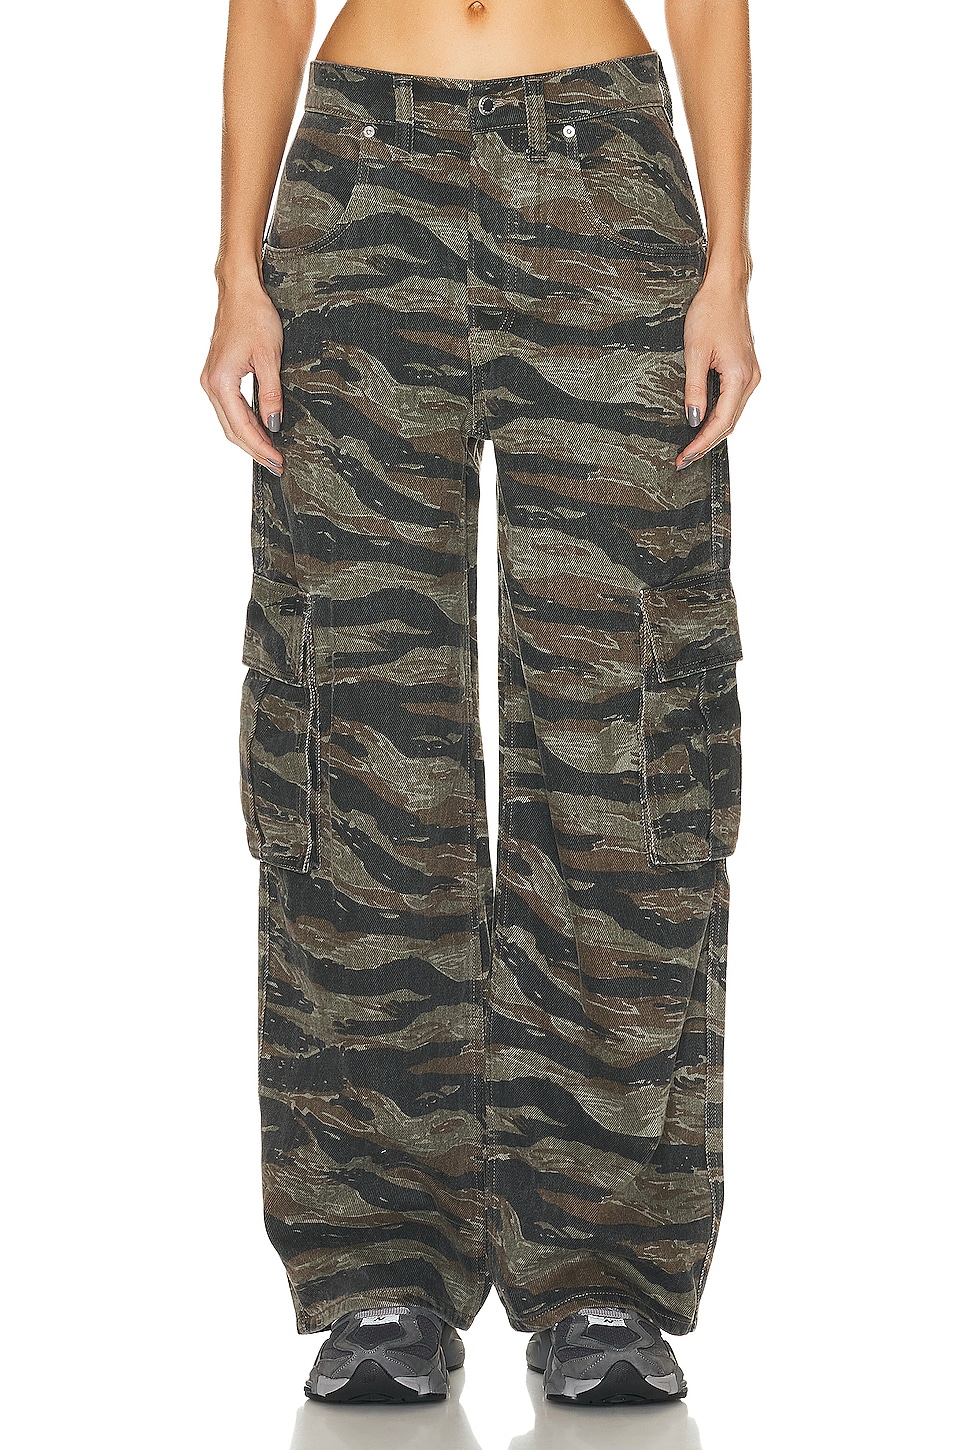 Image 1 of Alexander Wang Camo Bagged Out Pocket in Camo